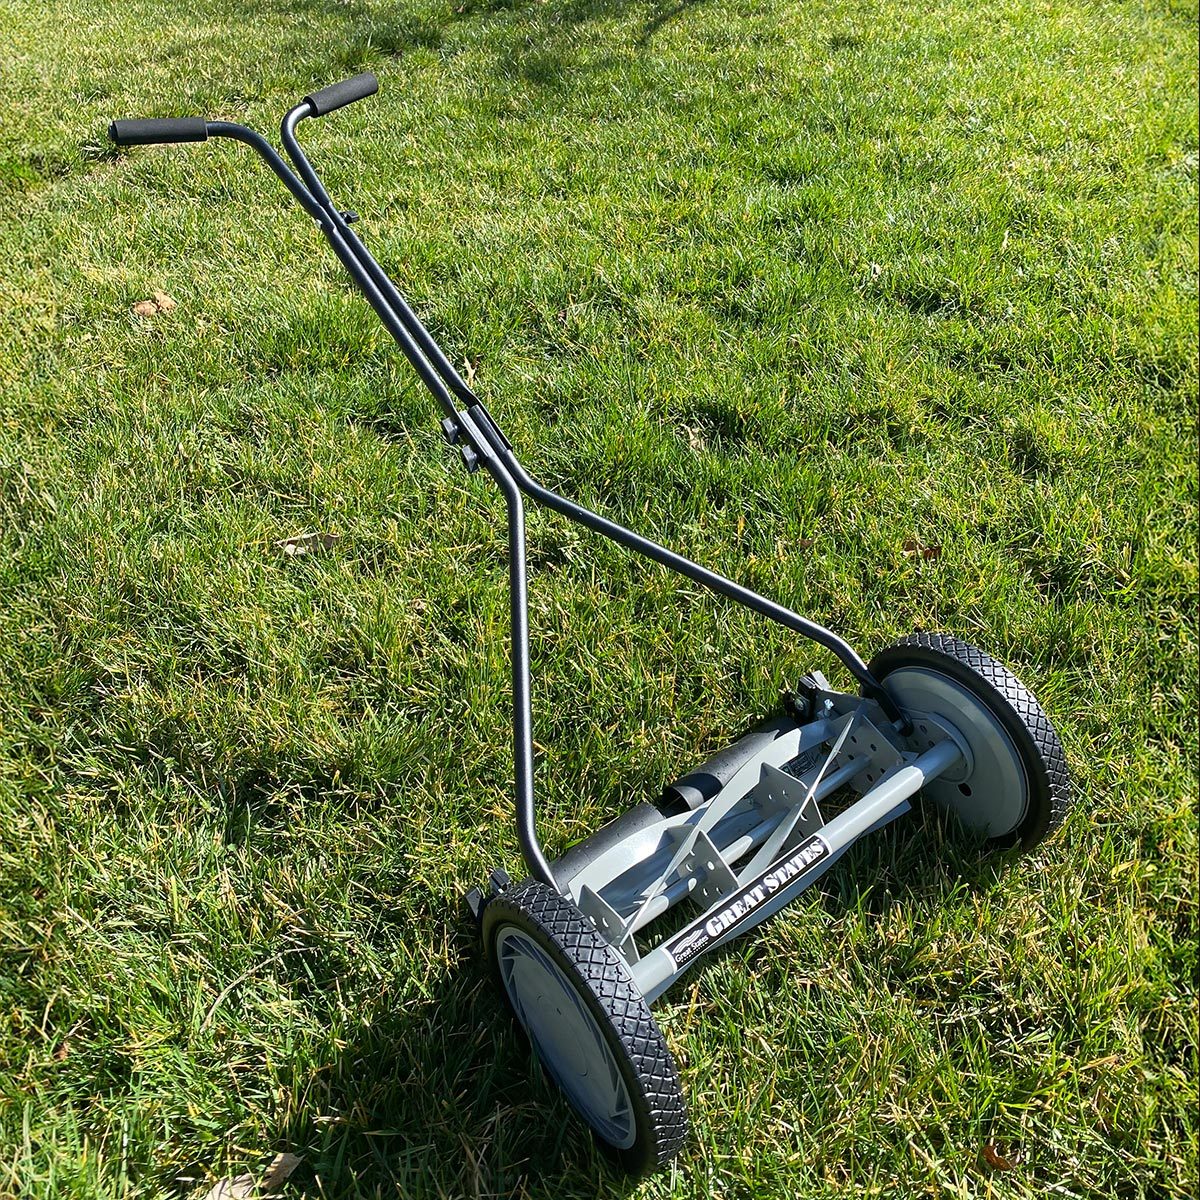 <h3>Great States 16-inch Reel Mower</h3> <p>Reel mowers are great options for many people but none better than those on a tight budget. I first owned a reel mower when I rented a house right after graduating college. I arranged to get a discounted rental rate if I mowed the lawn. A nice reel mower just like the <a href="https://www.amazon.com/Great-States-415-16-16-Inch-Standard/dp/B00002N691" rel="noopener">Great States 16-inch reel mower</a> helped me get the job done.</p> <p>At a super low price point, the Great States reel mower has the bare necessities required to <a href="https://www.familyhandyman.com/article/the-most-efficient-way-to-mow-the-grass/">mow the lawn</a>. The beauty of reel mowers like the Great States 16-inch reel mower is that it is quiet, easy to store, unassuming and still relatively easy to use. With the simplicity provided by the Great State reel mower, you don't have to worry about a bunch of random bells and whistles breaking. It is functional, simple and gets the job done.</p> <p><strong>Pros</strong></p> <ul> <li>Budget-friendly</li> <li>Decent cutting width</li> <li>Great for warm-season grasses</li> </ul> <p><strong>Cons</strong></p> <ul> <li>Limited cutting heights</li> <li>Less ergonomic on the wrists</li> </ul> <p class="listicle-page__cta-button-shop"><a class="shop-btn" href="https://www.amazon.com/Great-States-415-16-16-Inch-Standard/dp/B00002N691">Shop on Amazon</a></p> <p class="listicle-page__cta-button-shop"><a class="shop-btn" href="https://www.homedepot.com/p/Great-States-Corporation-16-in-5-Blade-Manual-Walk-Behind-Reel-Lawn-Mower-415-16-21/316442583">Shop on Home Depot</a></p> <p class="listicle-page__cta-button-shop"><a class="shop-btn" href="https://www.walmart.com/ip/Great-States-415-16-16-5-Blade-Push-Reel-Mower/1551081">Shop on Walmart</a></p>